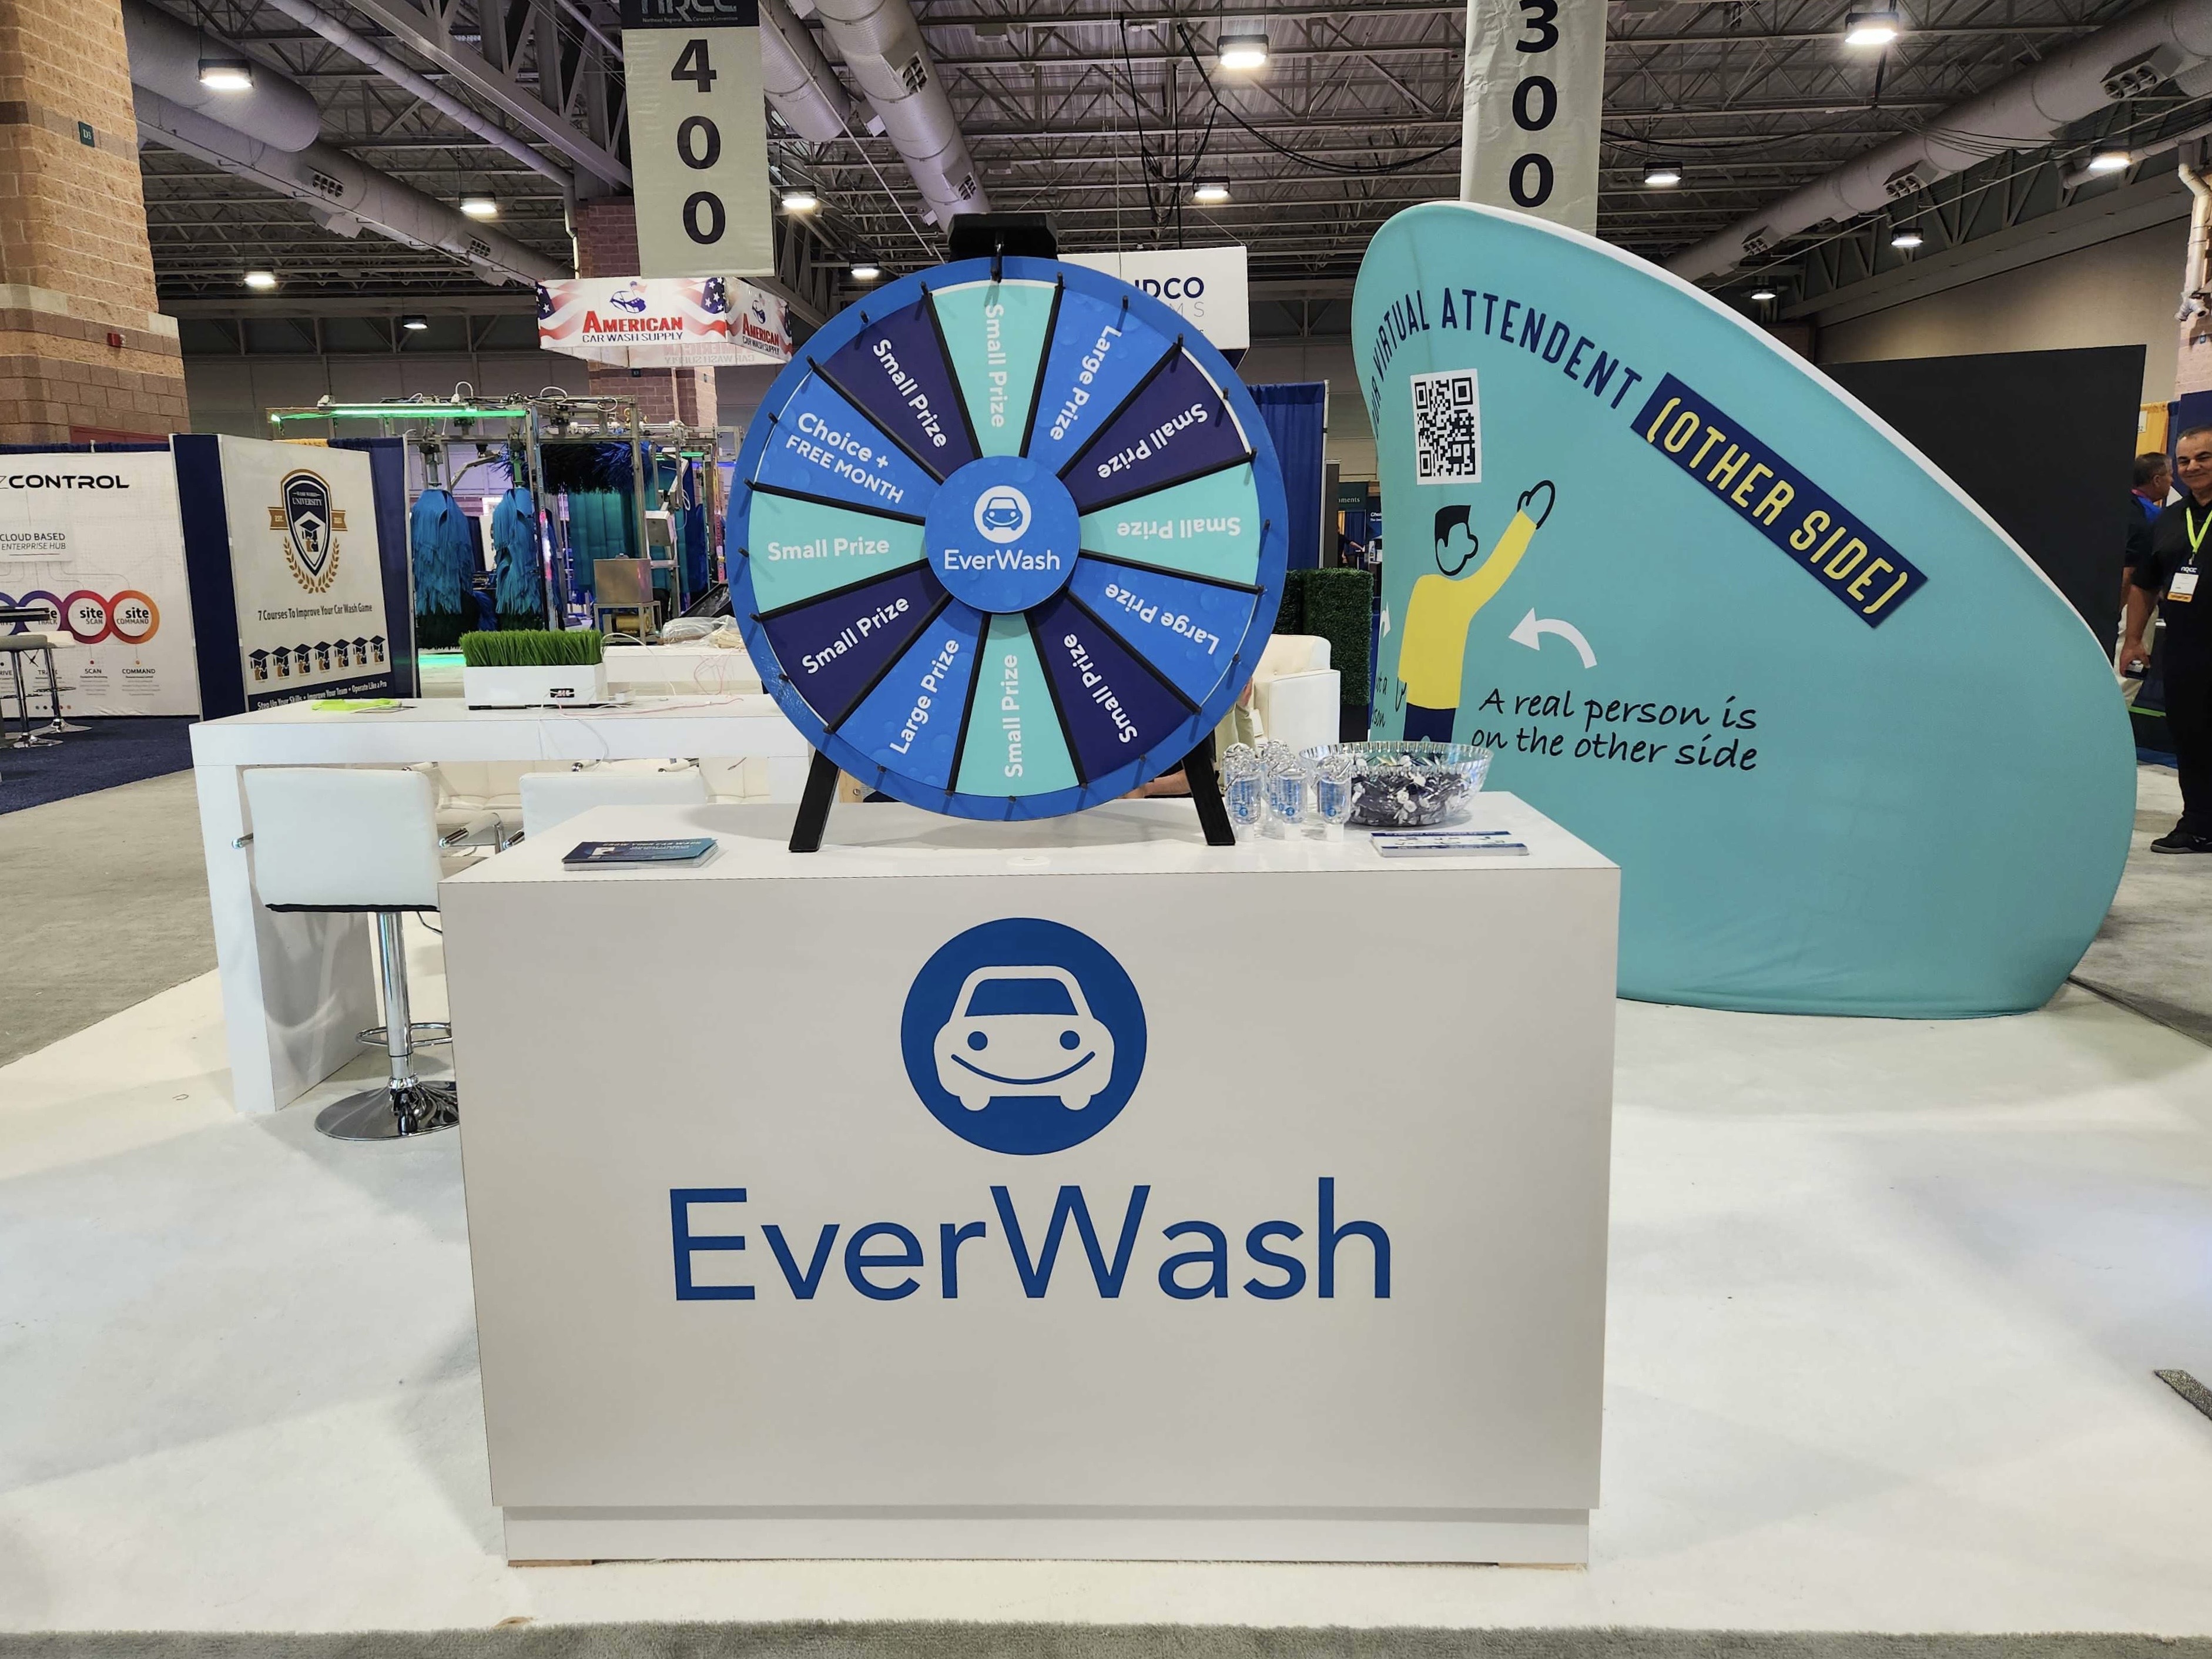 There was a noticeable buzz around the EverWash booth throughout the two-day show as the company unveiled their newest Virtual Attendant prototype, exhibited the possibilities of connected car integrations, and demonstrated the power of a dedicated salesperson with EverWash Ignite.